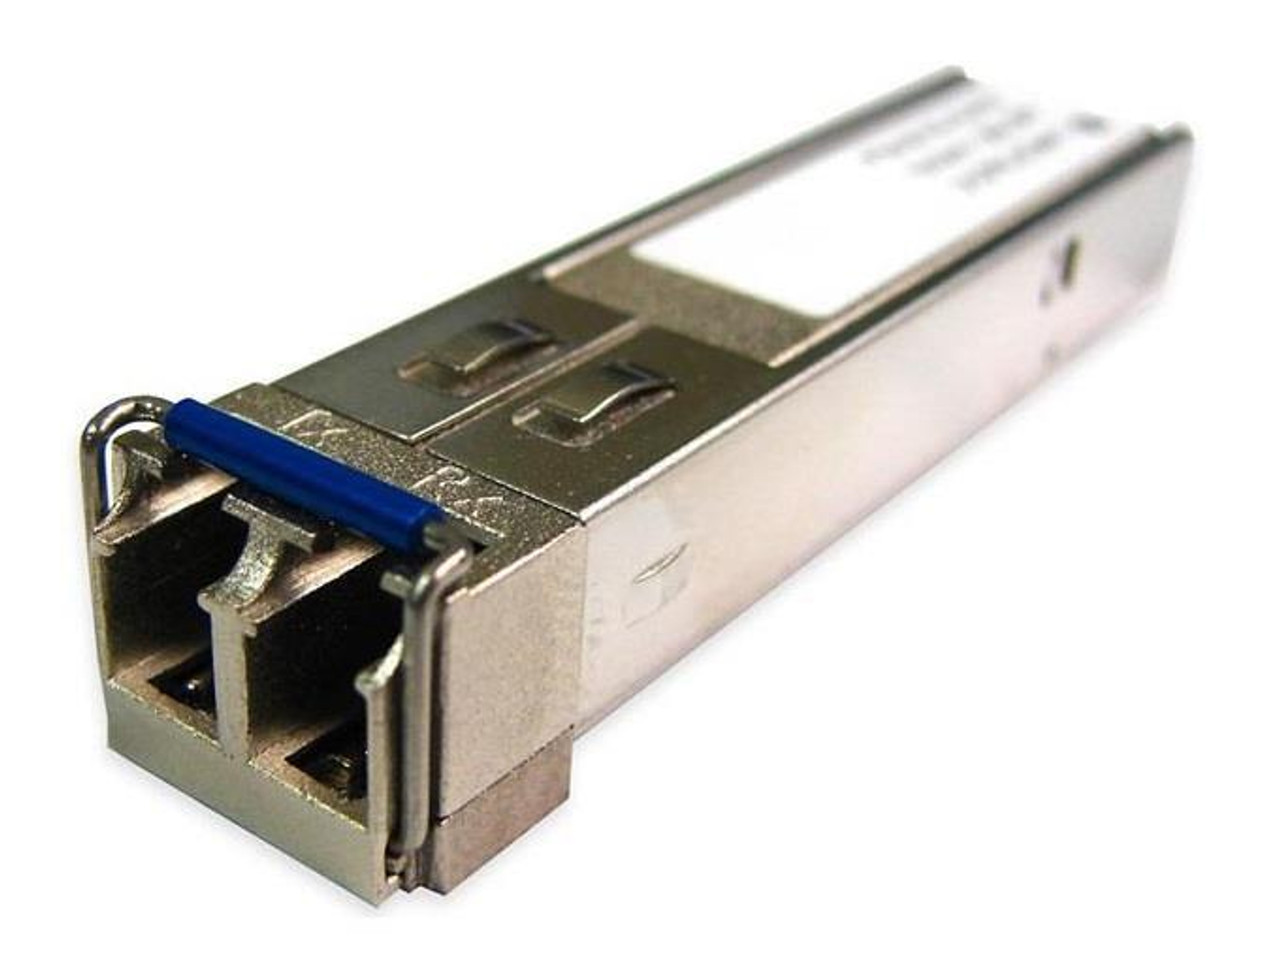 JD063B-ACC Accortec 1Gbps 1000Base-ZX LH70 Single-mode Fiber 70km 1550nm Duplex LC Connector SFP Transceiver Module for HP Compatible